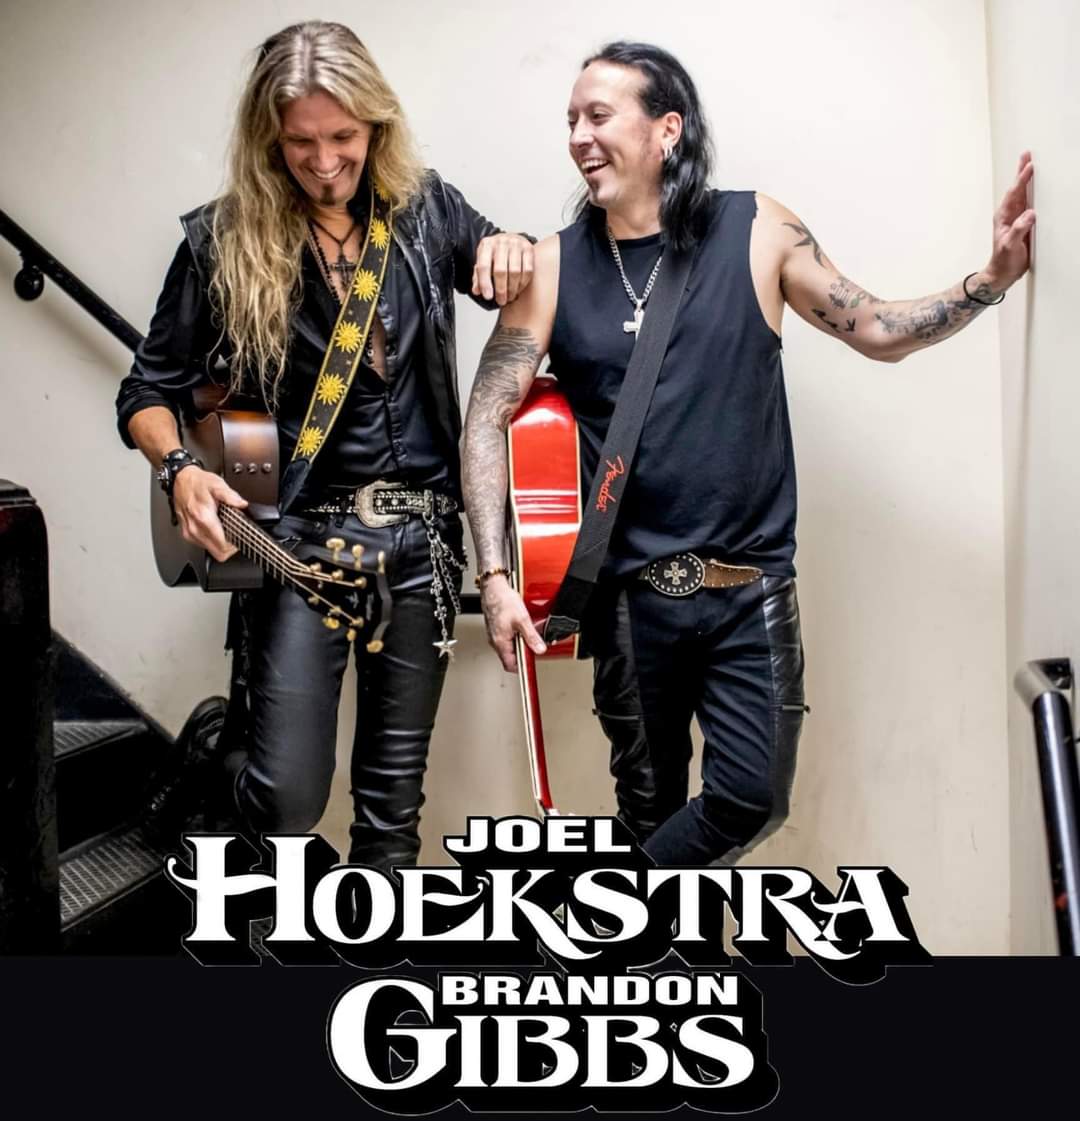 Hoekstra / Gibbs @joelhoekstra13 @BGibbsmusic 2024 USA Tour Upcoming shows 4/18: Private Event 4/19: New Hope Winery New Hope, Pa 4/20:Brauns Concert Cove Clarence, NY 4/21 Lakewatch Inn Ithaca, NY Tickets: @TicketWeb.com